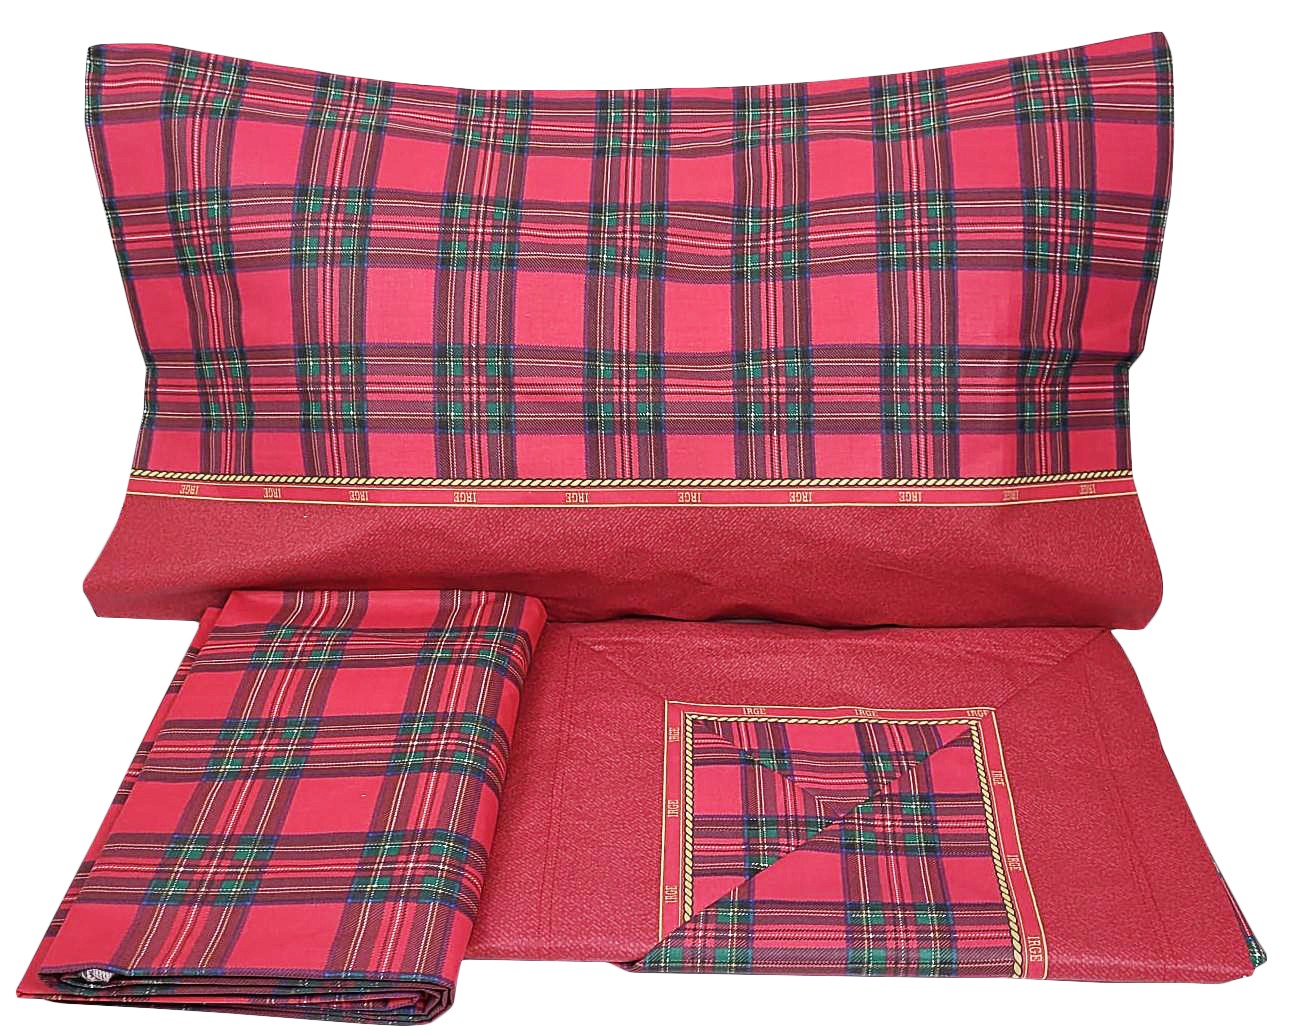 THERMAL MB COMPLETO LETTO LENZUOLA MATRIMONIALI 2 PIAZZE IN PILE AUTUNNO  INVERNO